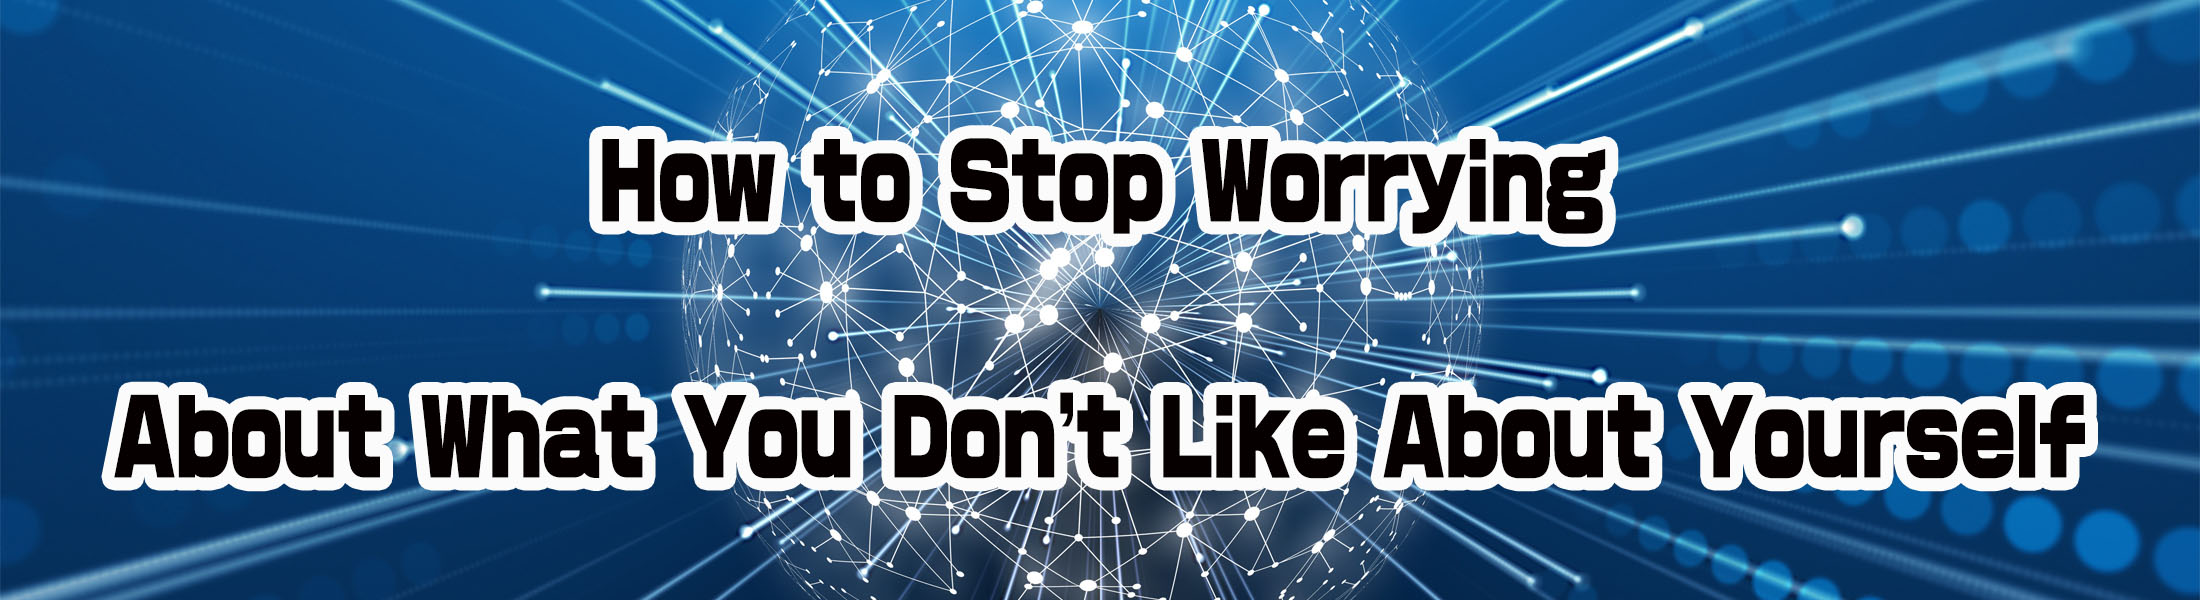 How to Stop Worrying About What You Don’t Like About Yourself